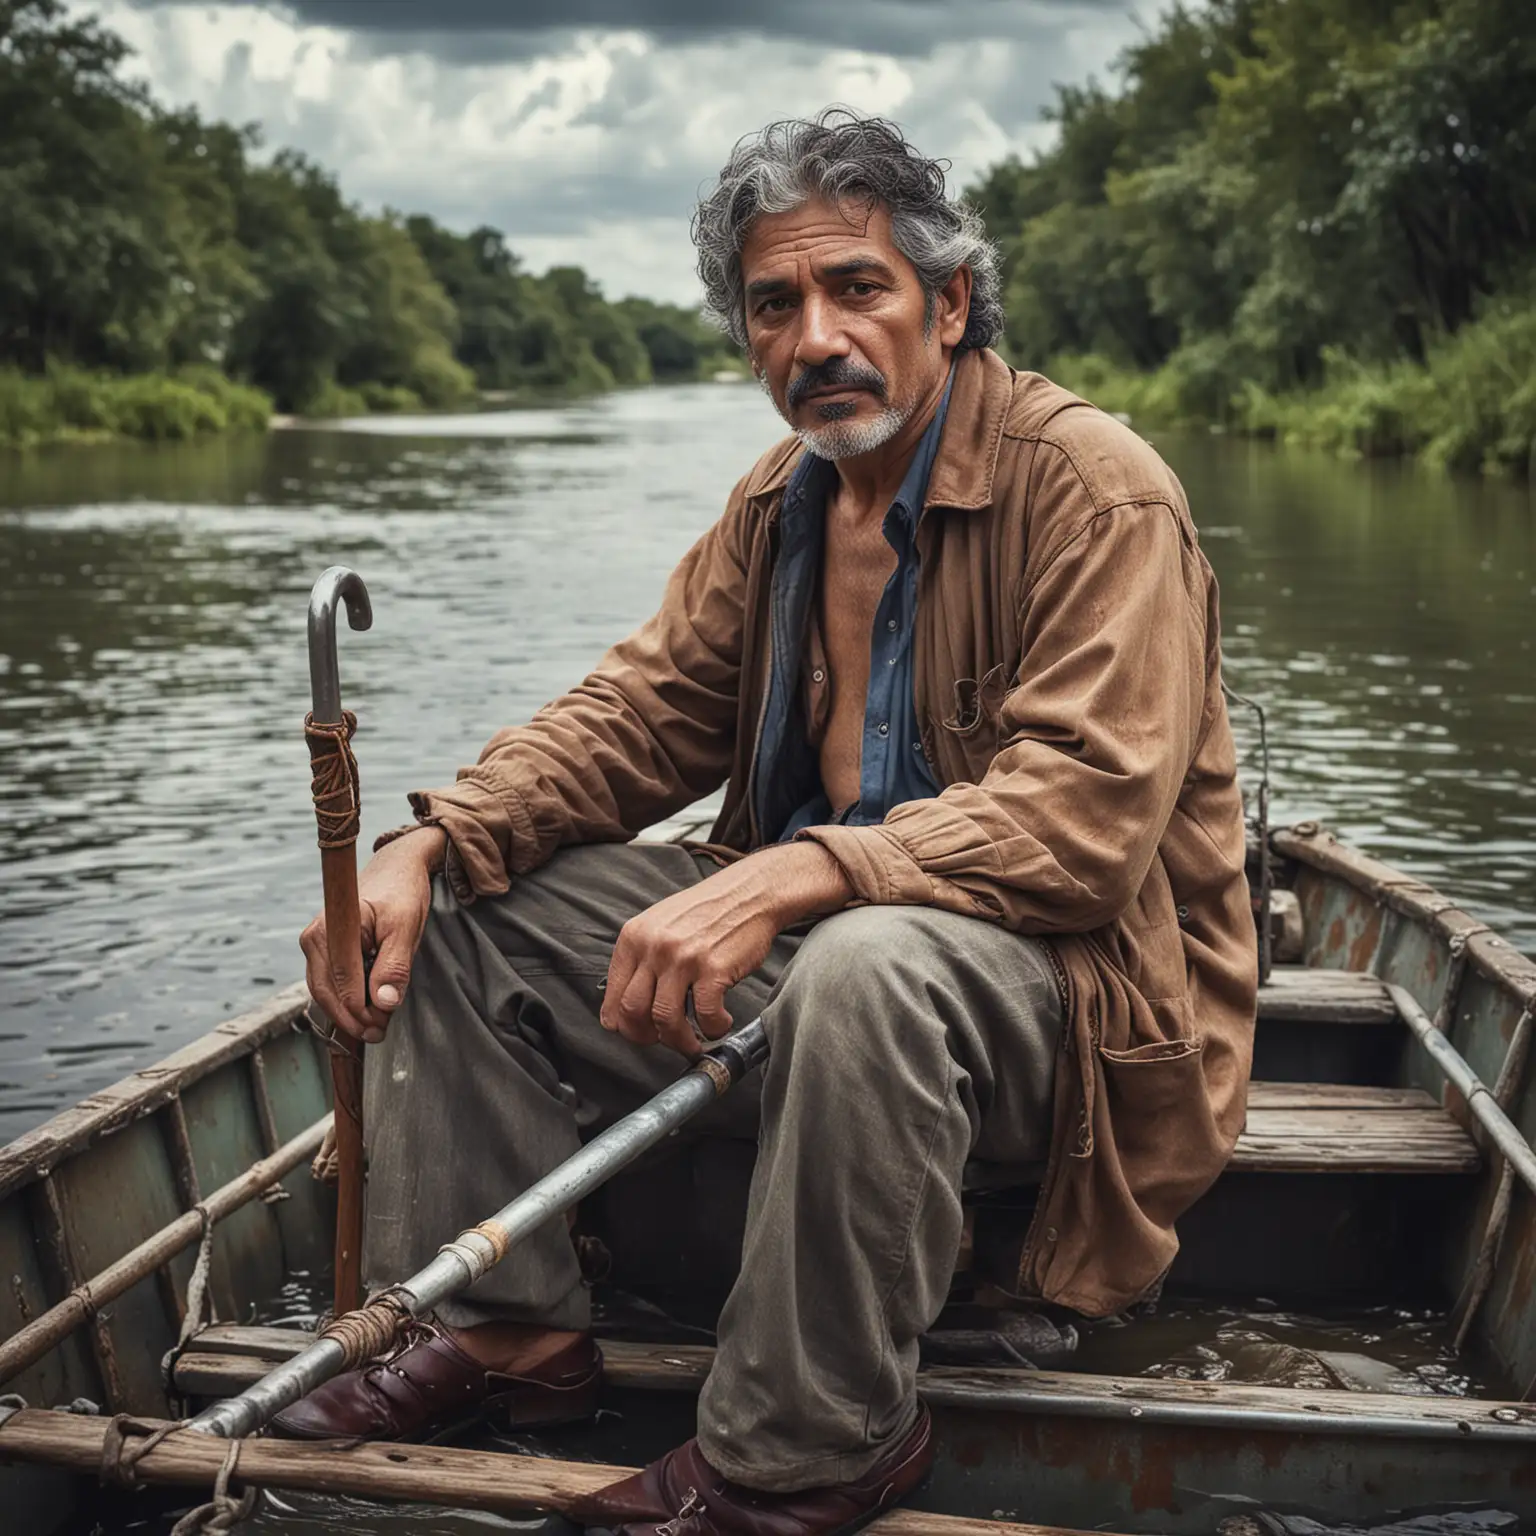 Hispanic Man with Cane Sitting in Metal Motor Boat on River